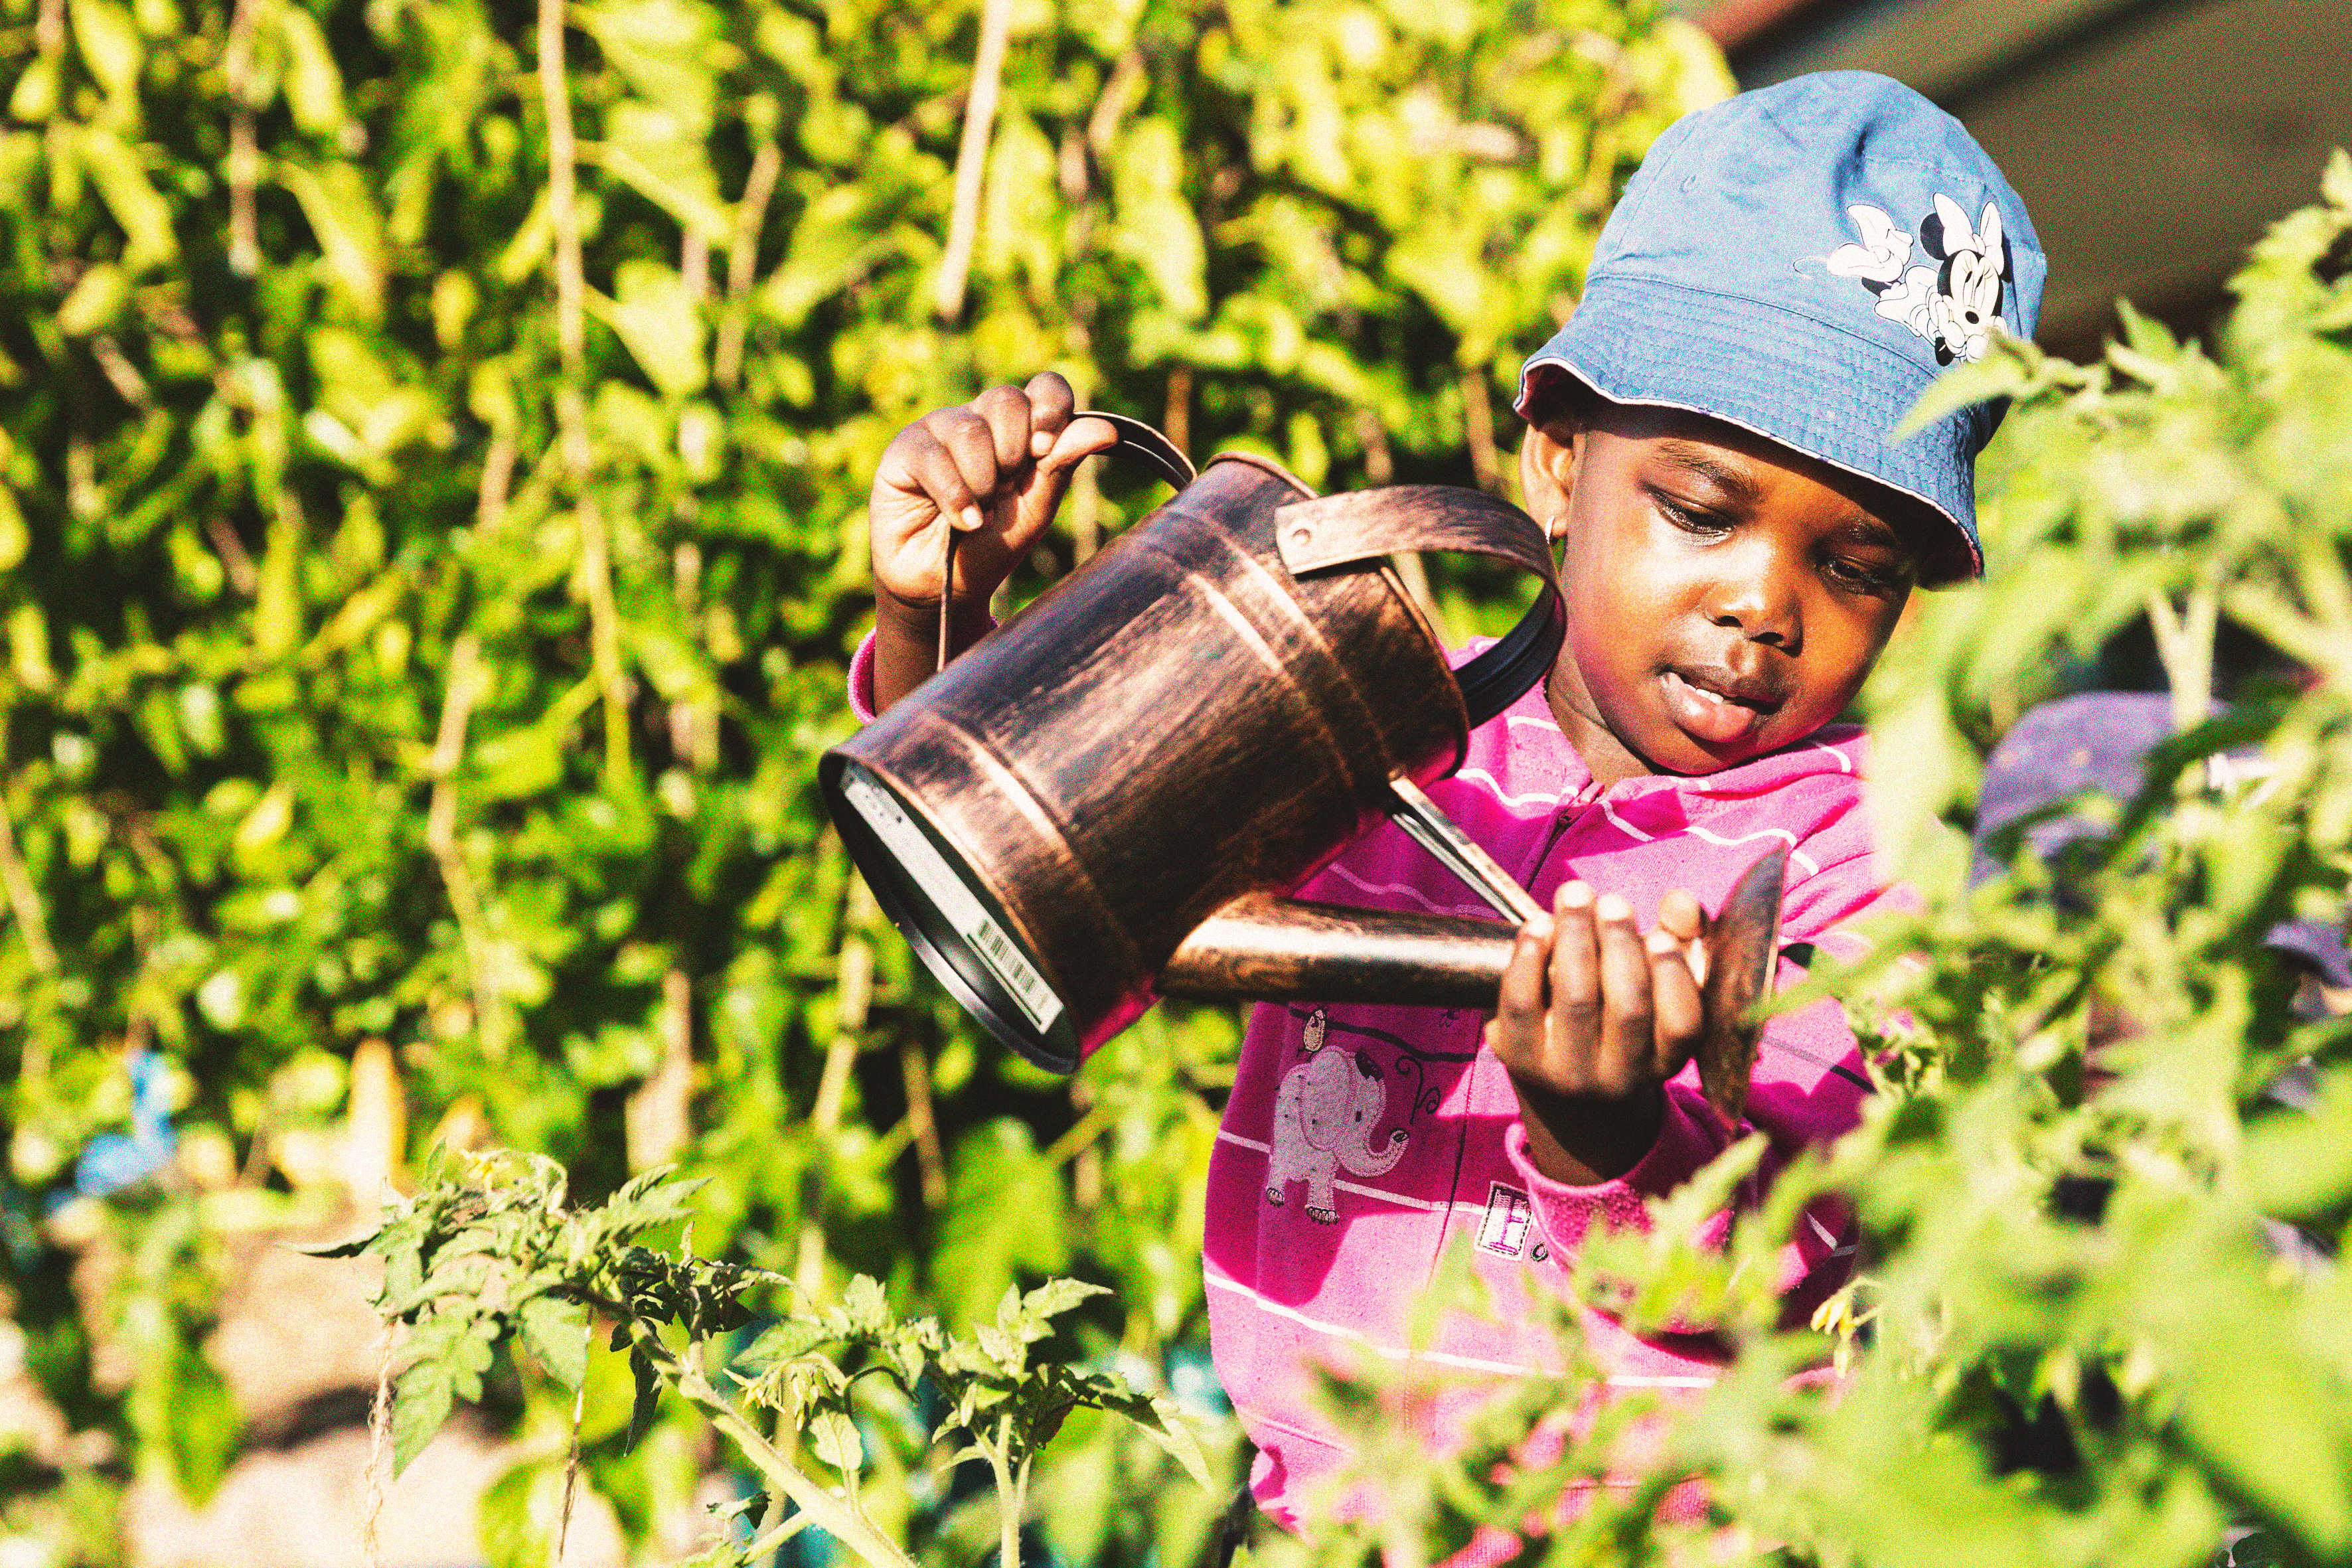 A young girl watering plants